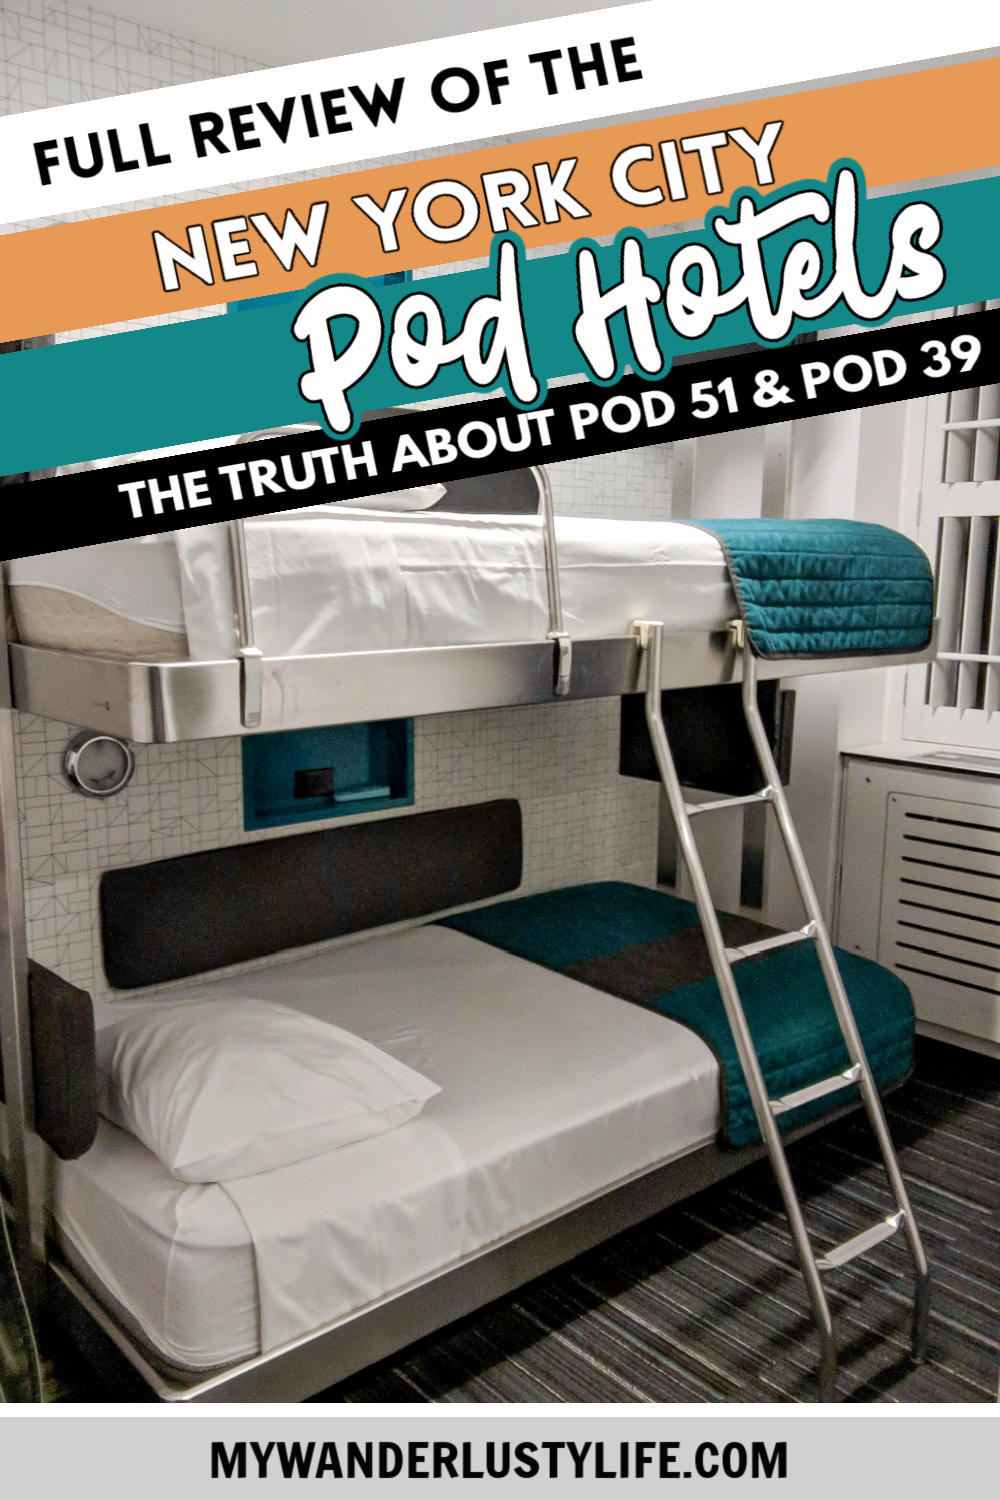 Pod Hotel Review: The Truth About Pod 51 and Pod 39 in New York City, Manhattan | What it's like to stay at a New York Pod Hotel, Pod 51 reviews, Pod 39 reviews